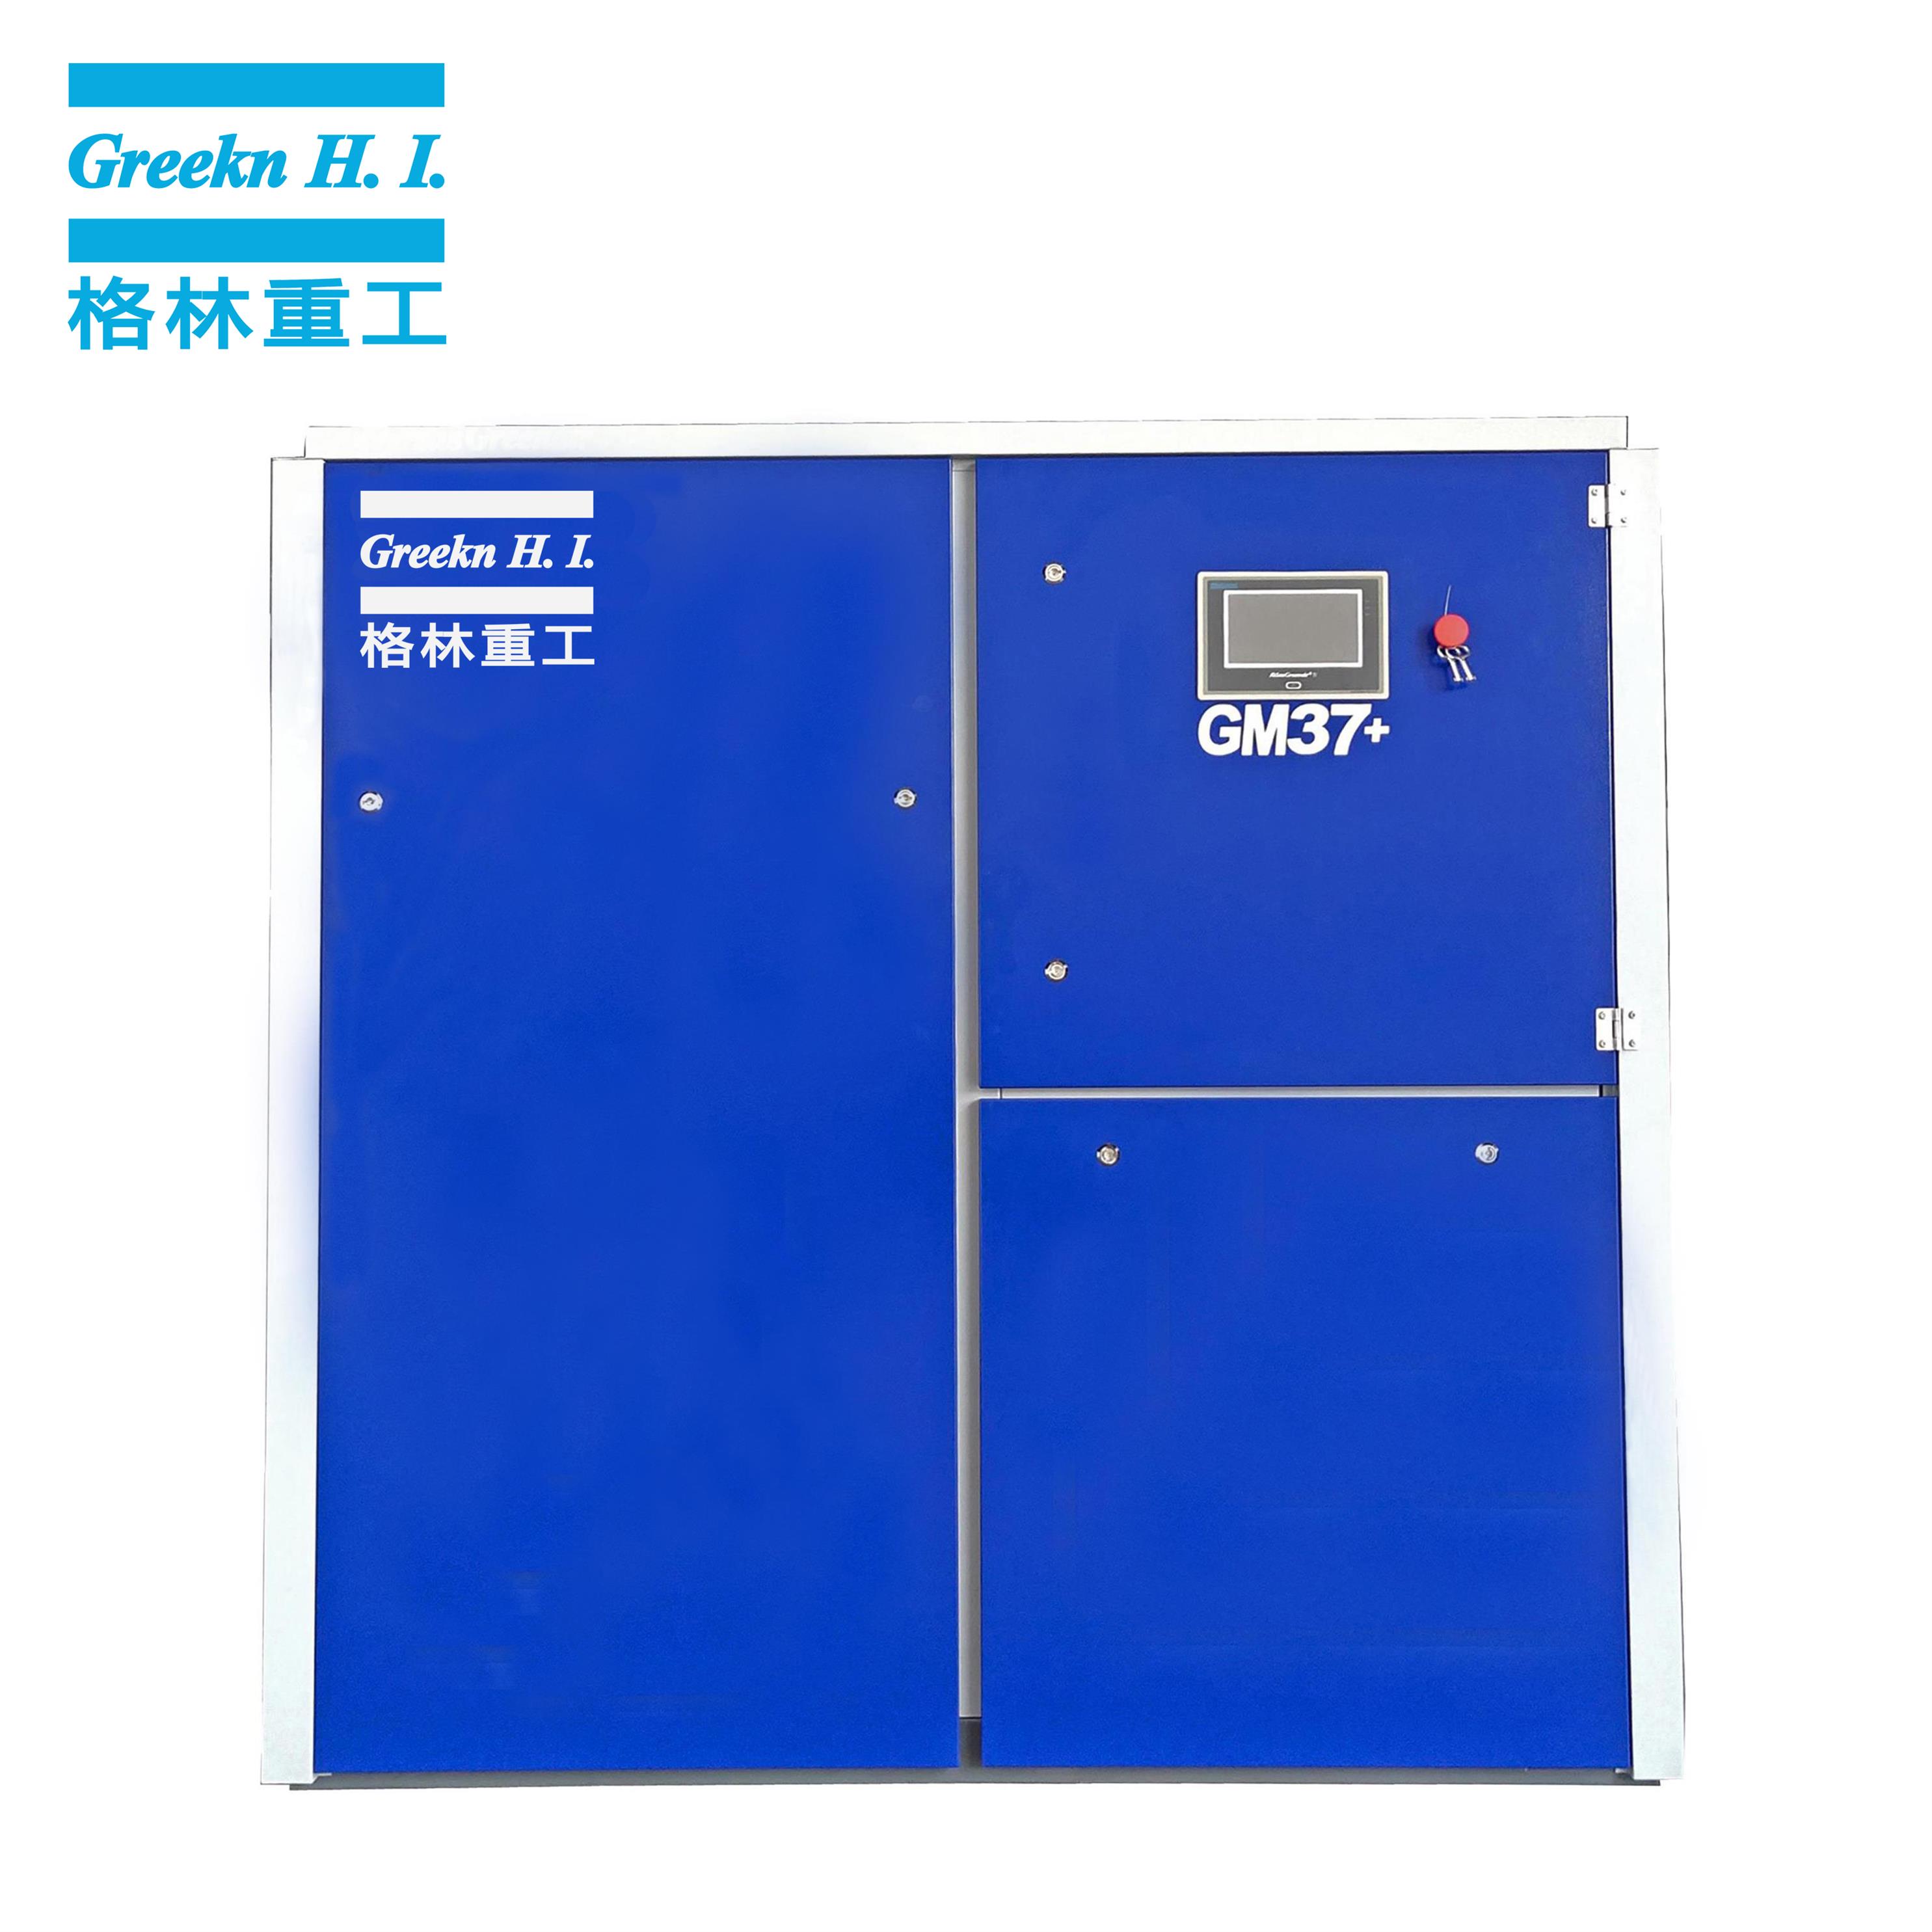 Greeknhi Air Compressor GM+ Series PM Motor Two Stage Variable Speed Rotary Screw Air Compressor